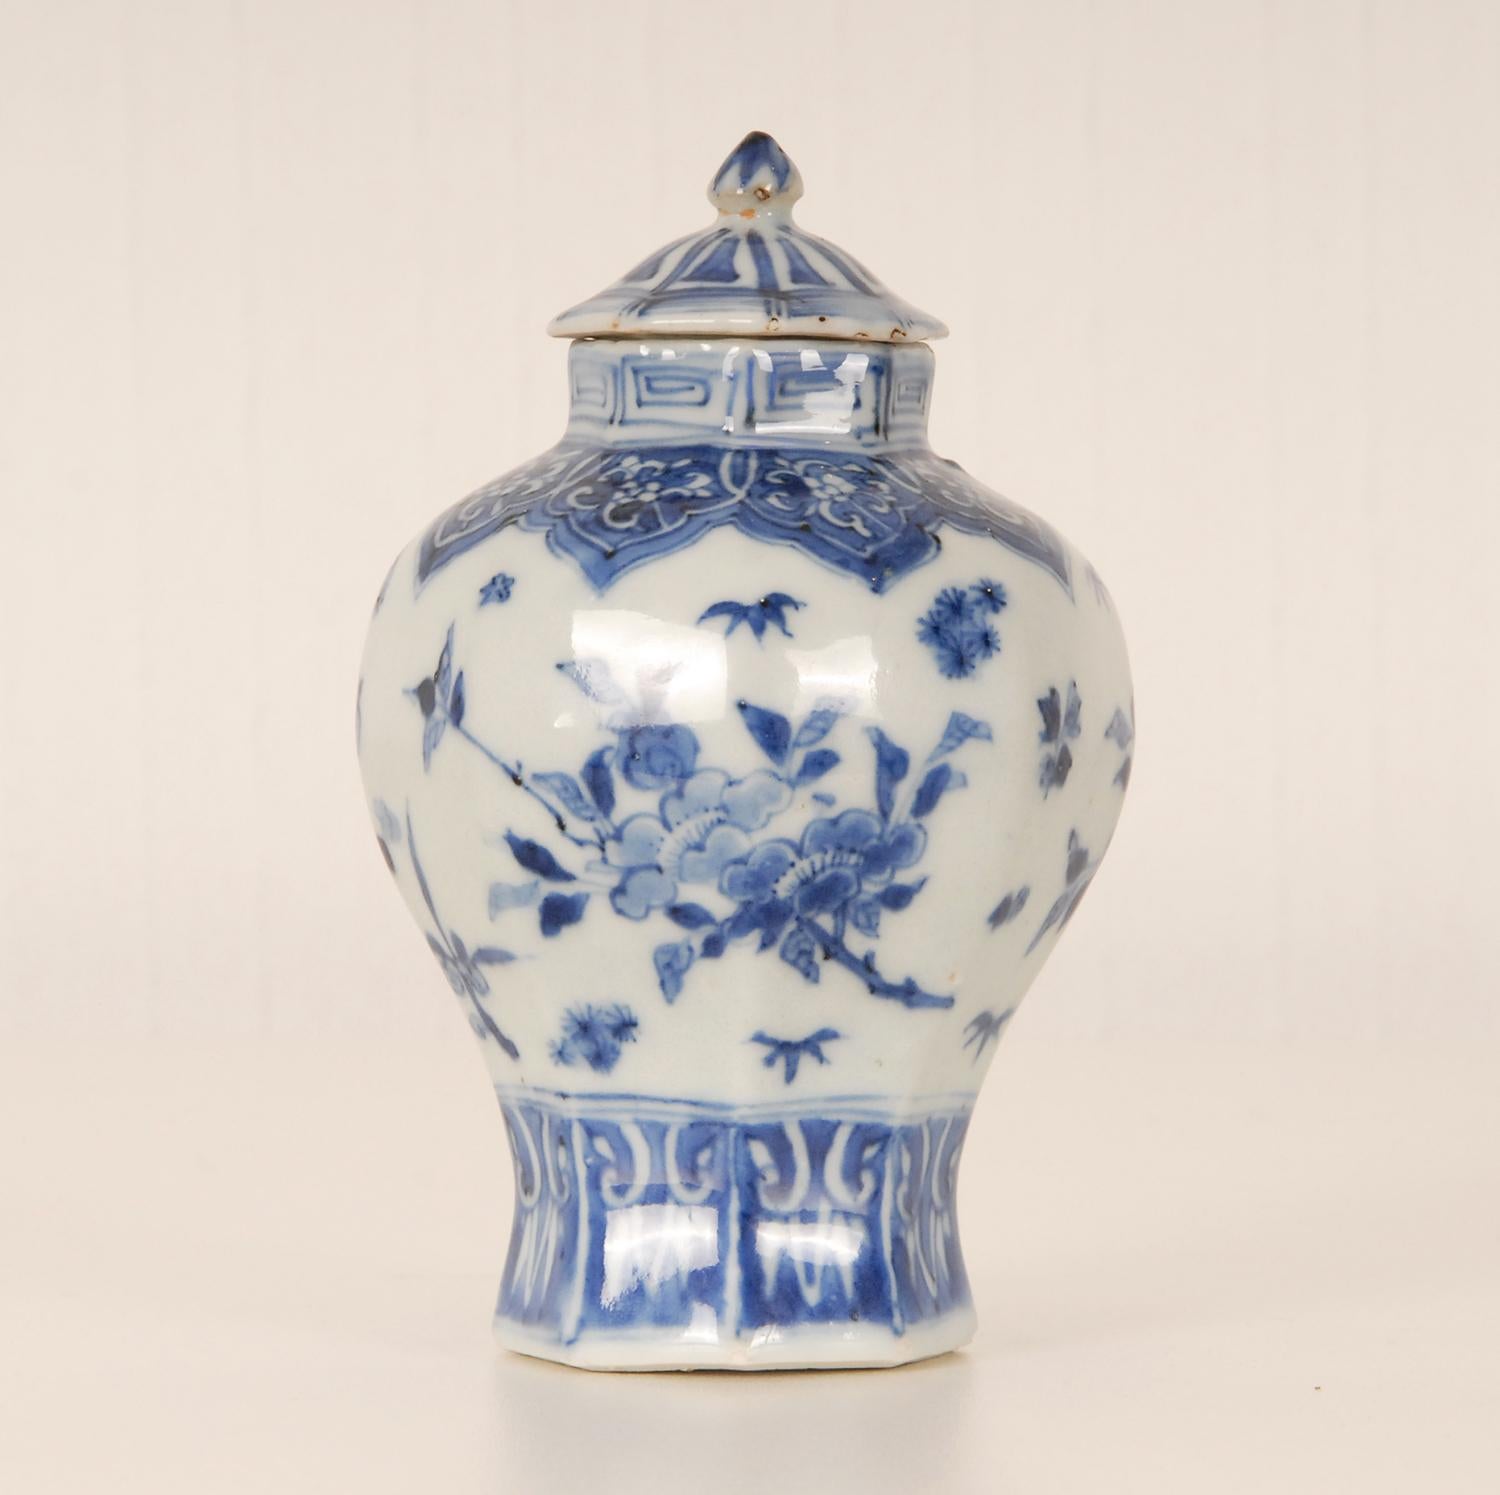 17th century Chinese Ming Porcelain Ceramic Blue and White Vase Covered For Sale 2